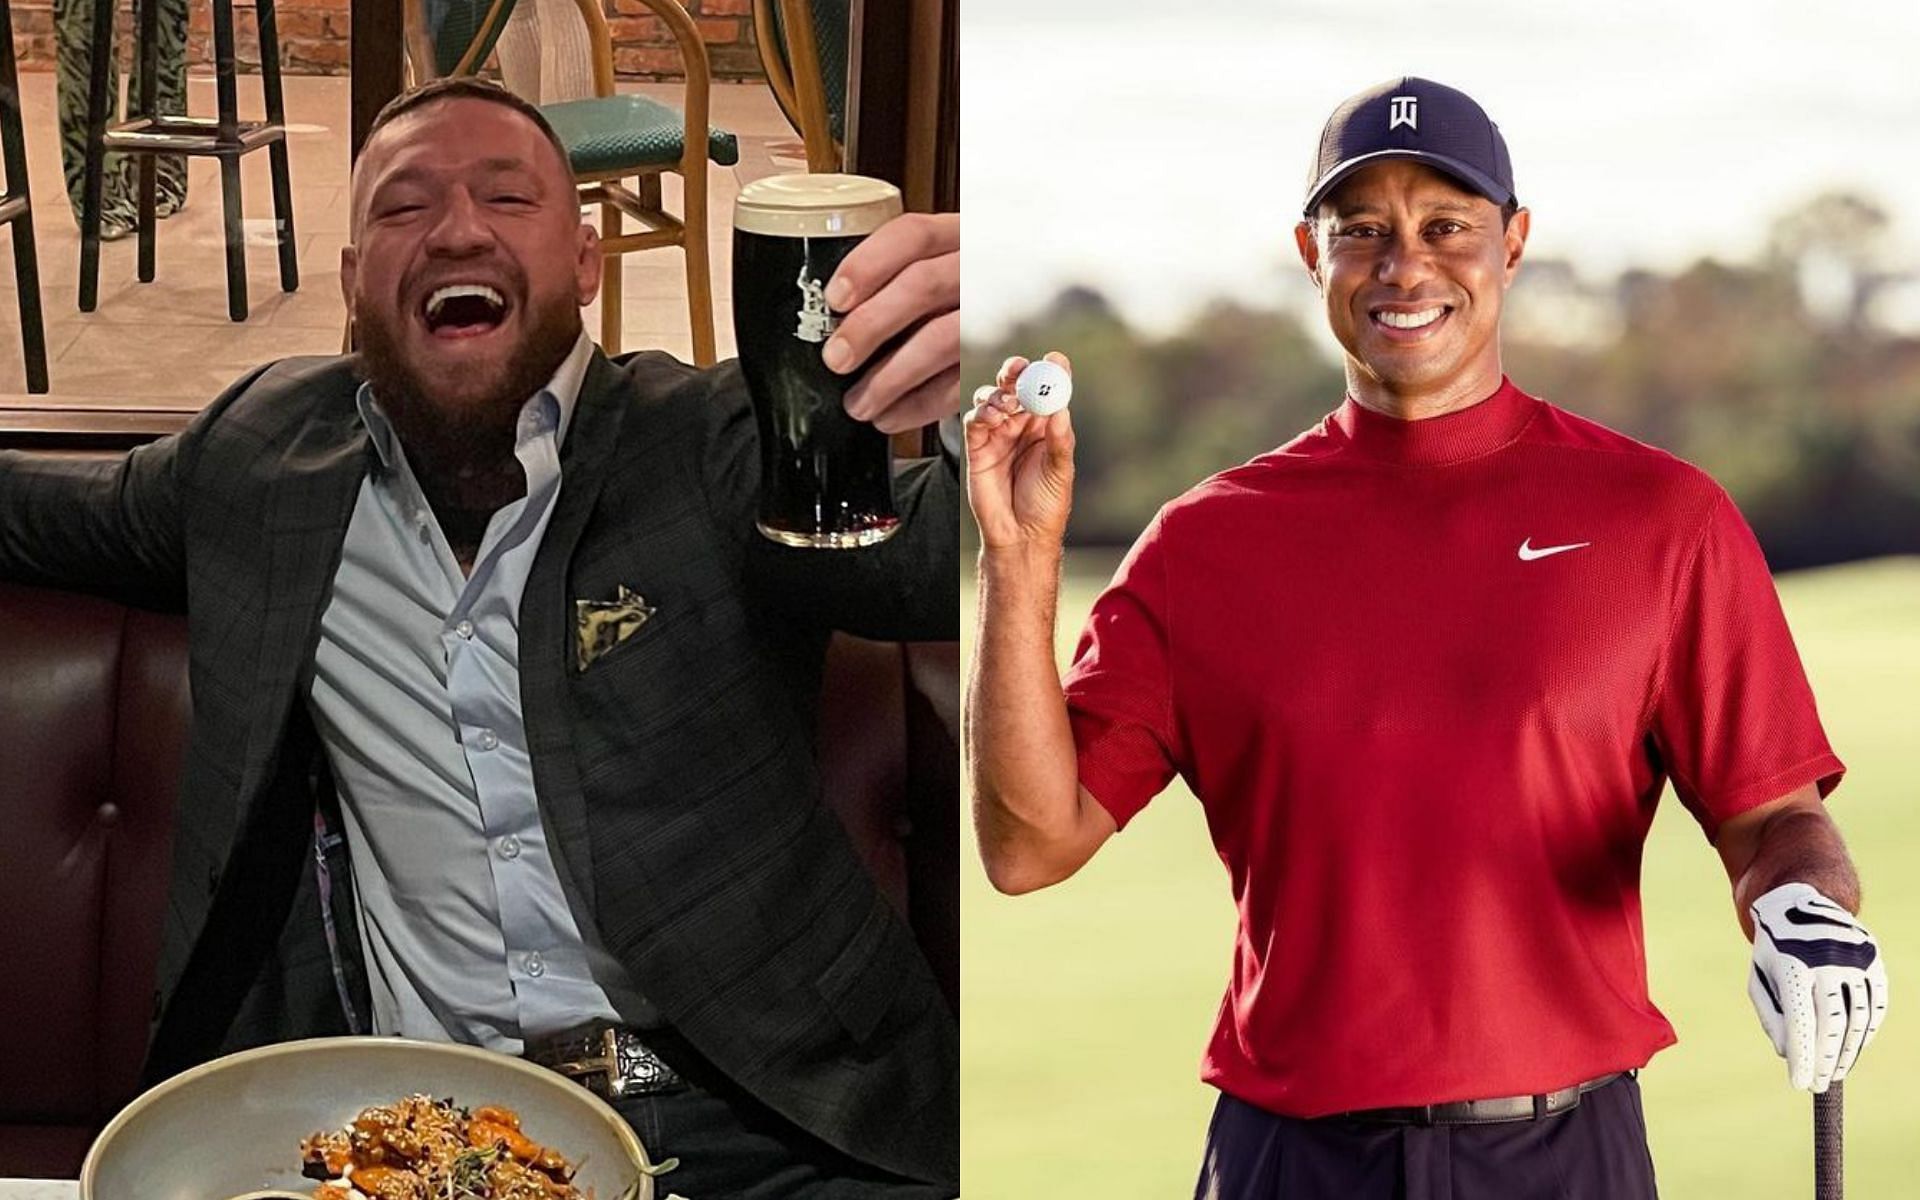 Conor McGregor (L) and Tiger Woods (R) via Instagram @thenotoriousmma and @tigerwoods